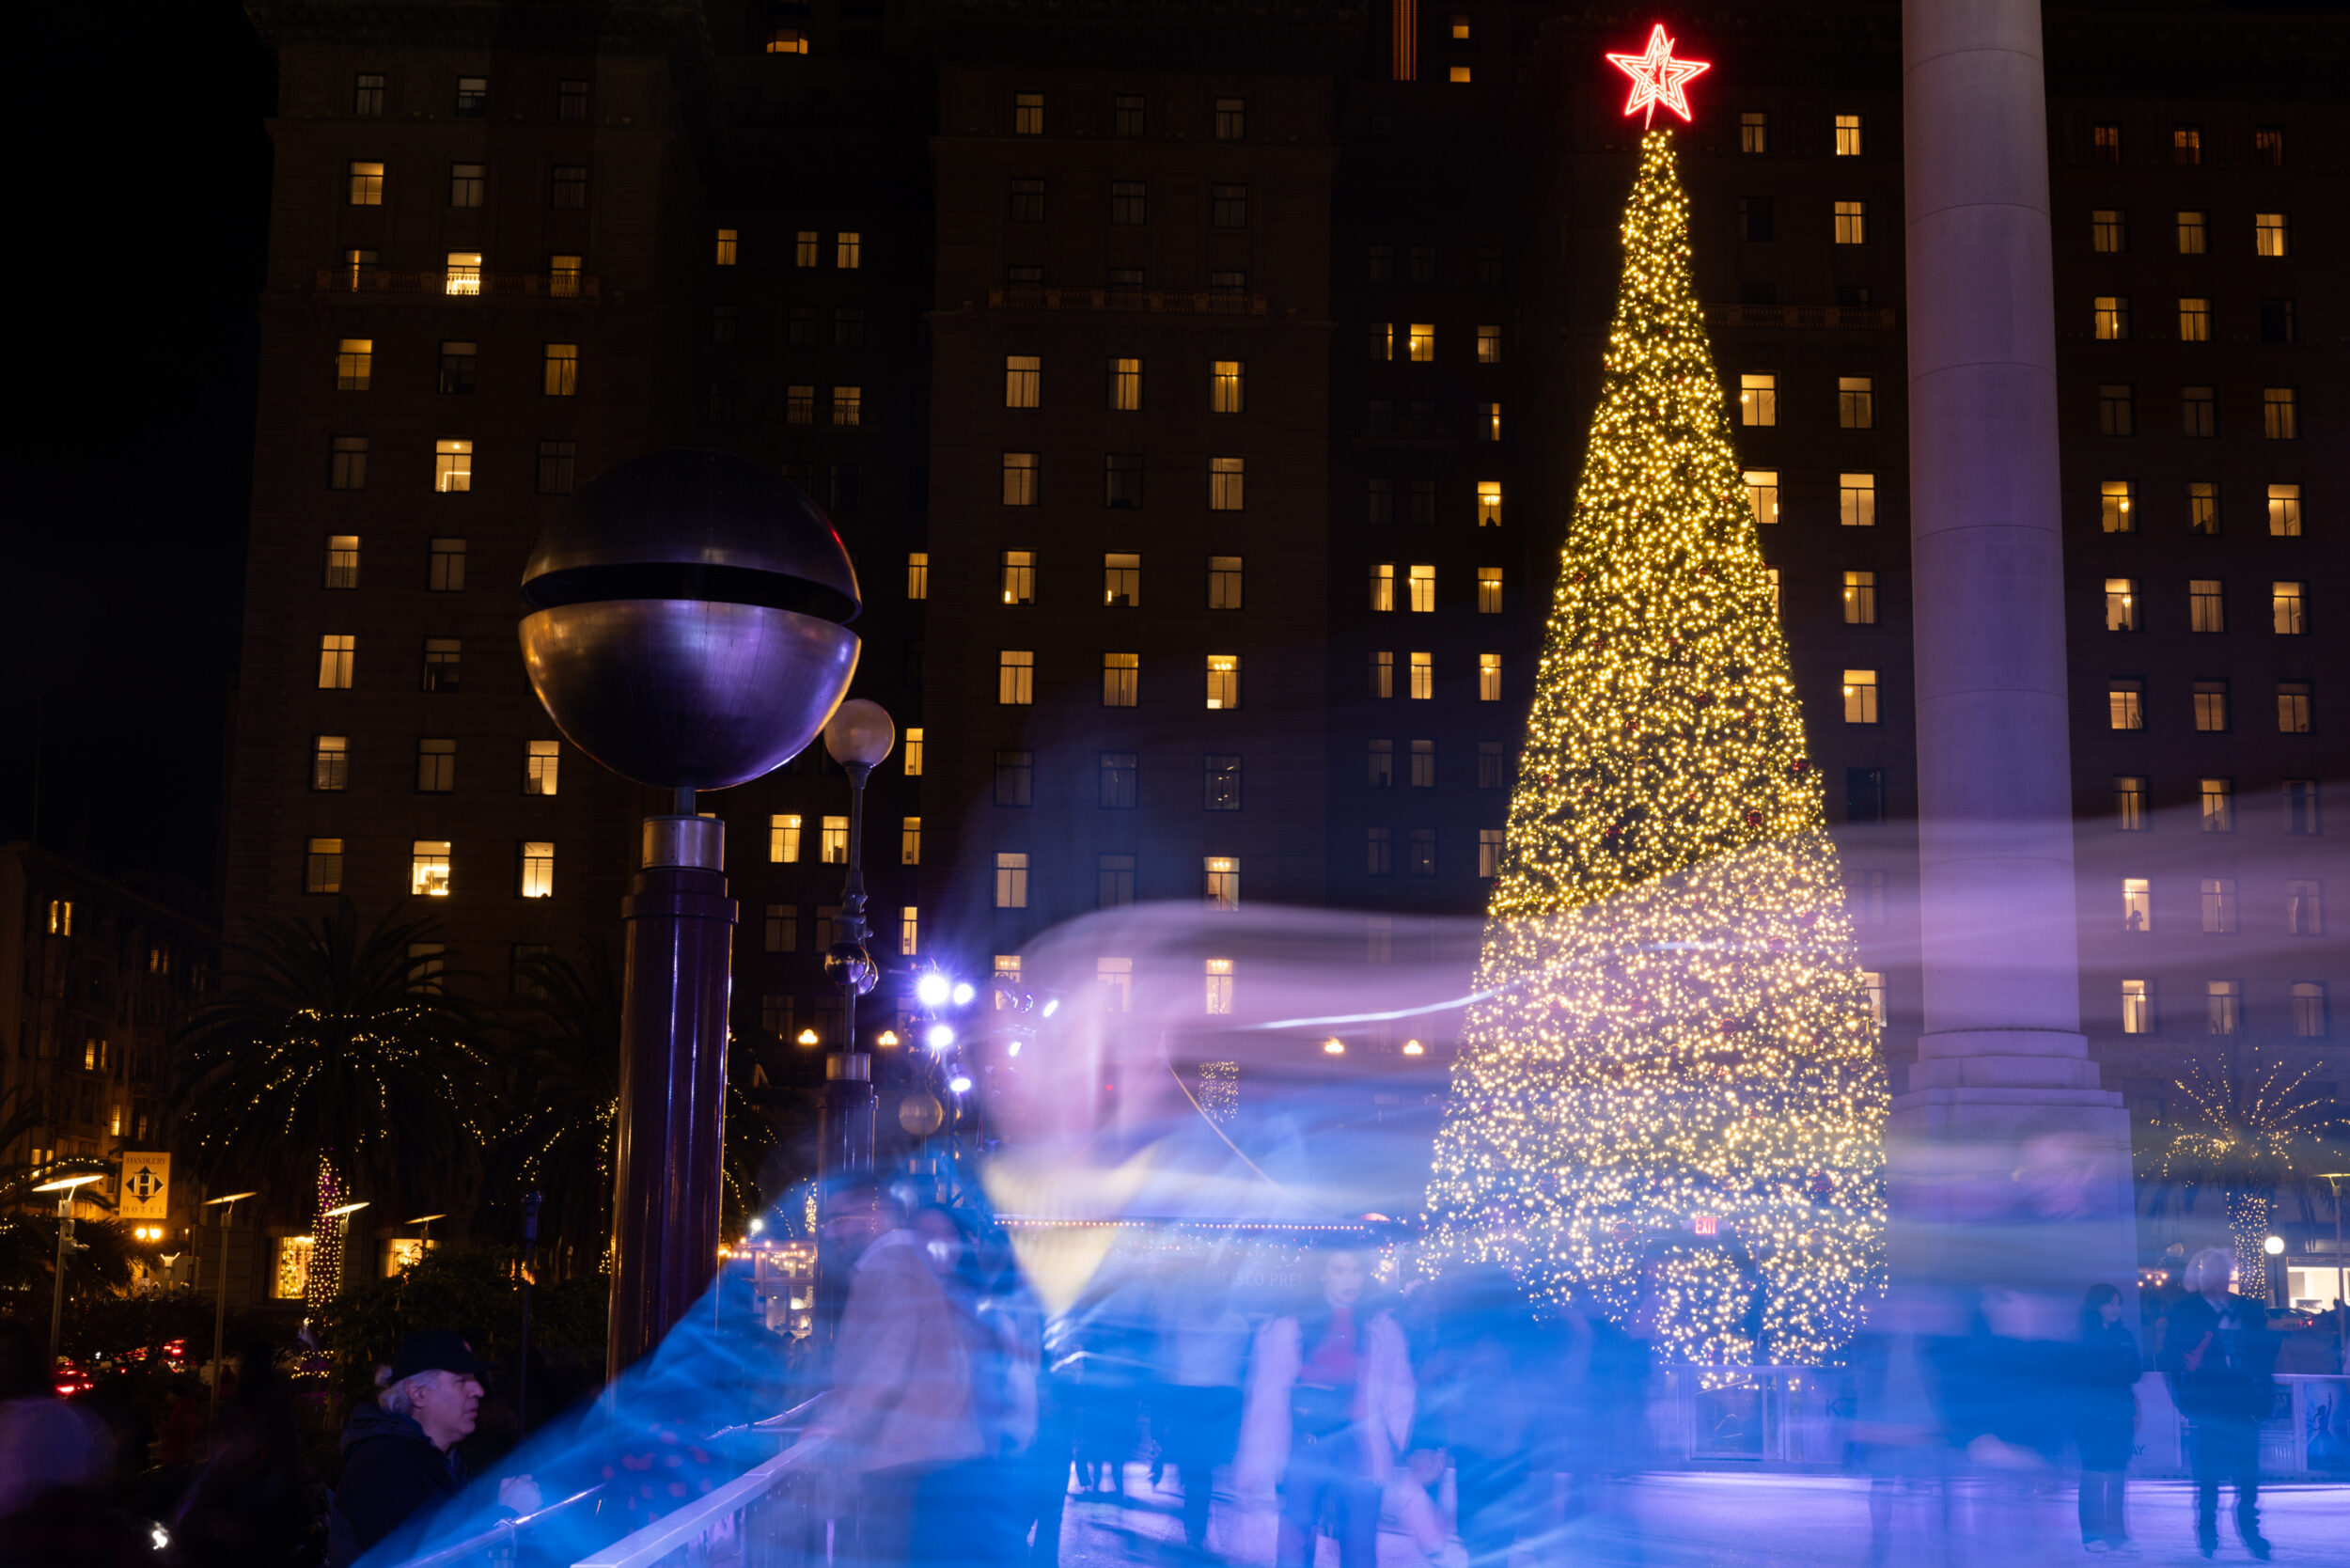 Union Square’s Christmas tree stands behind an ice skating rink filled with skaters. | Benjamin Fanjoy/The Standard